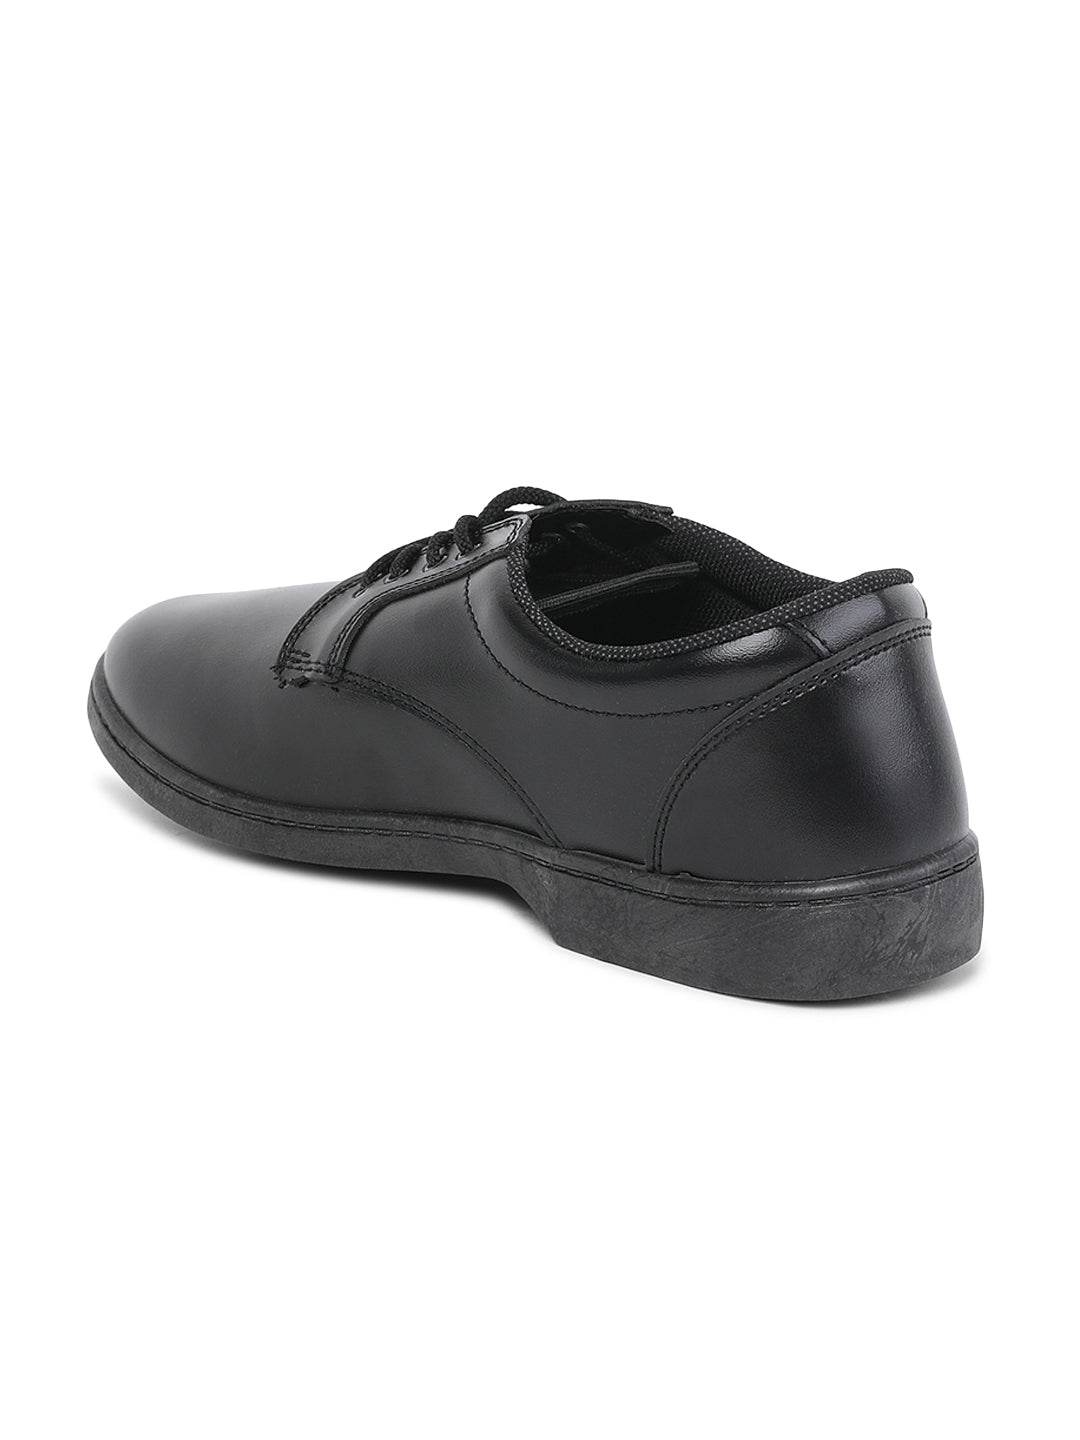 Paragon  PV0751T Kids Formal School Shoes | Comfortable Cushioned Soles | School Shoes for Boys &amp; Girls